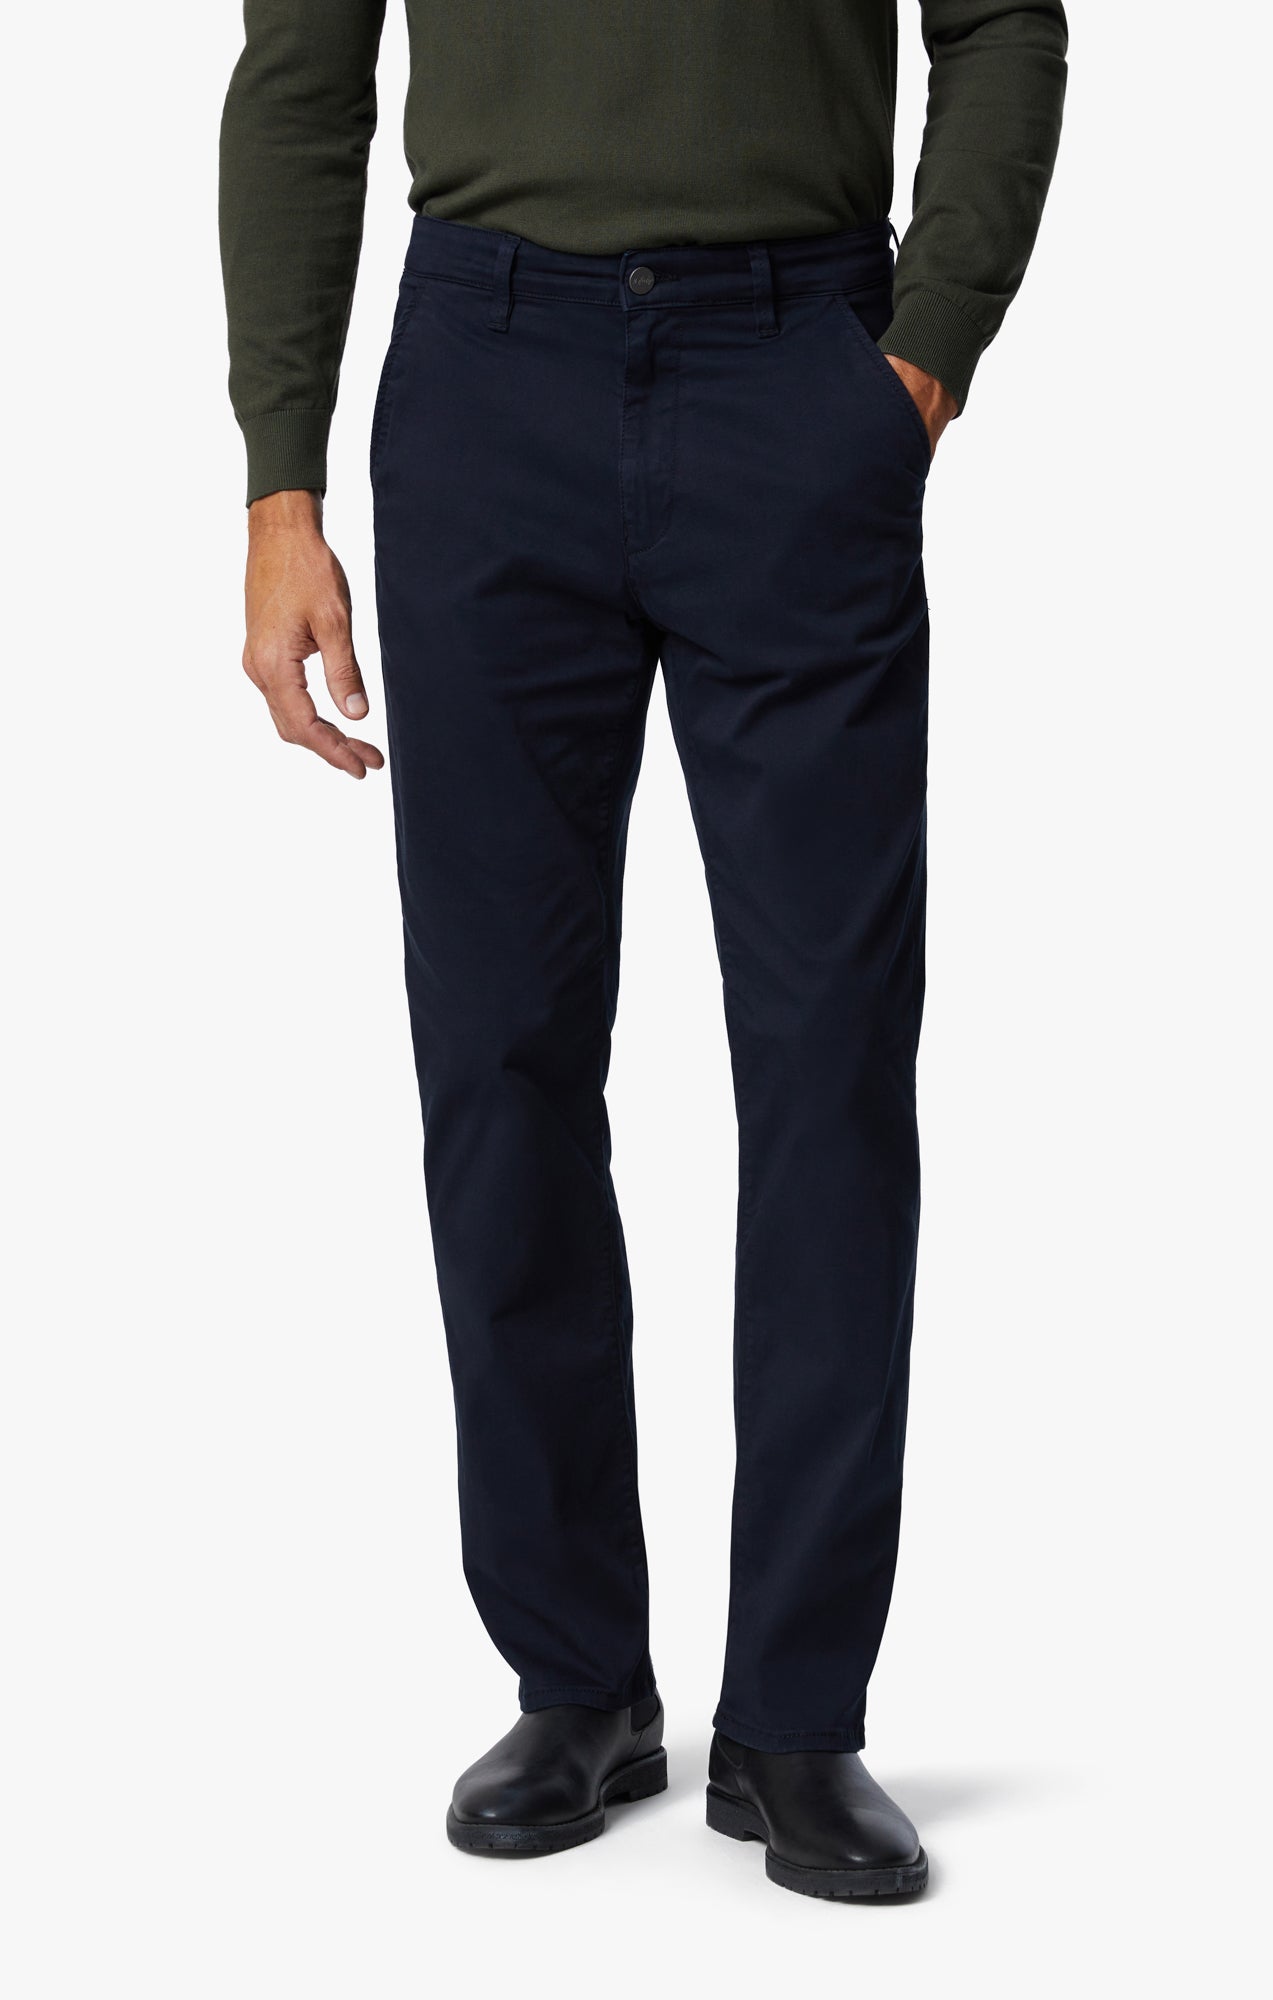 Charisma Relaxed Straight Chino In Navy Twill